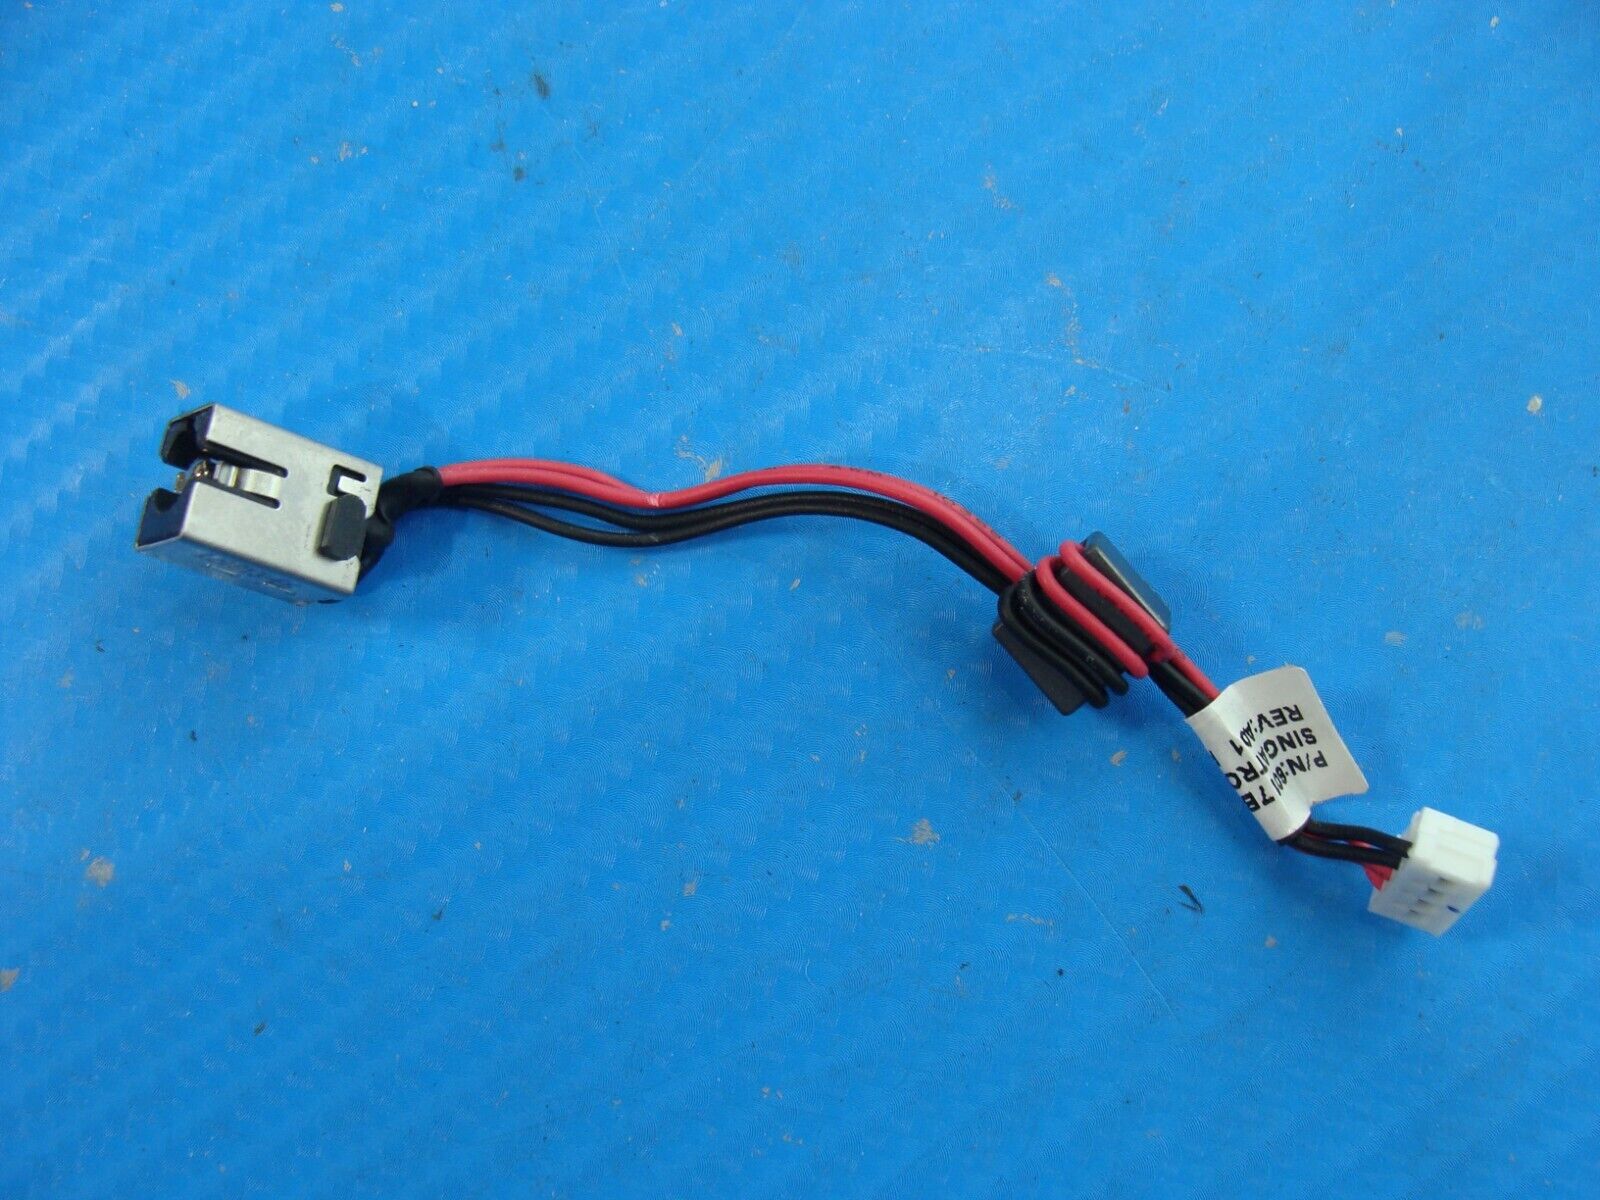 Toshiba Satellite 15.6” L855 OEM Laptop DC IN Power Jack w/Cable 6017B0356001